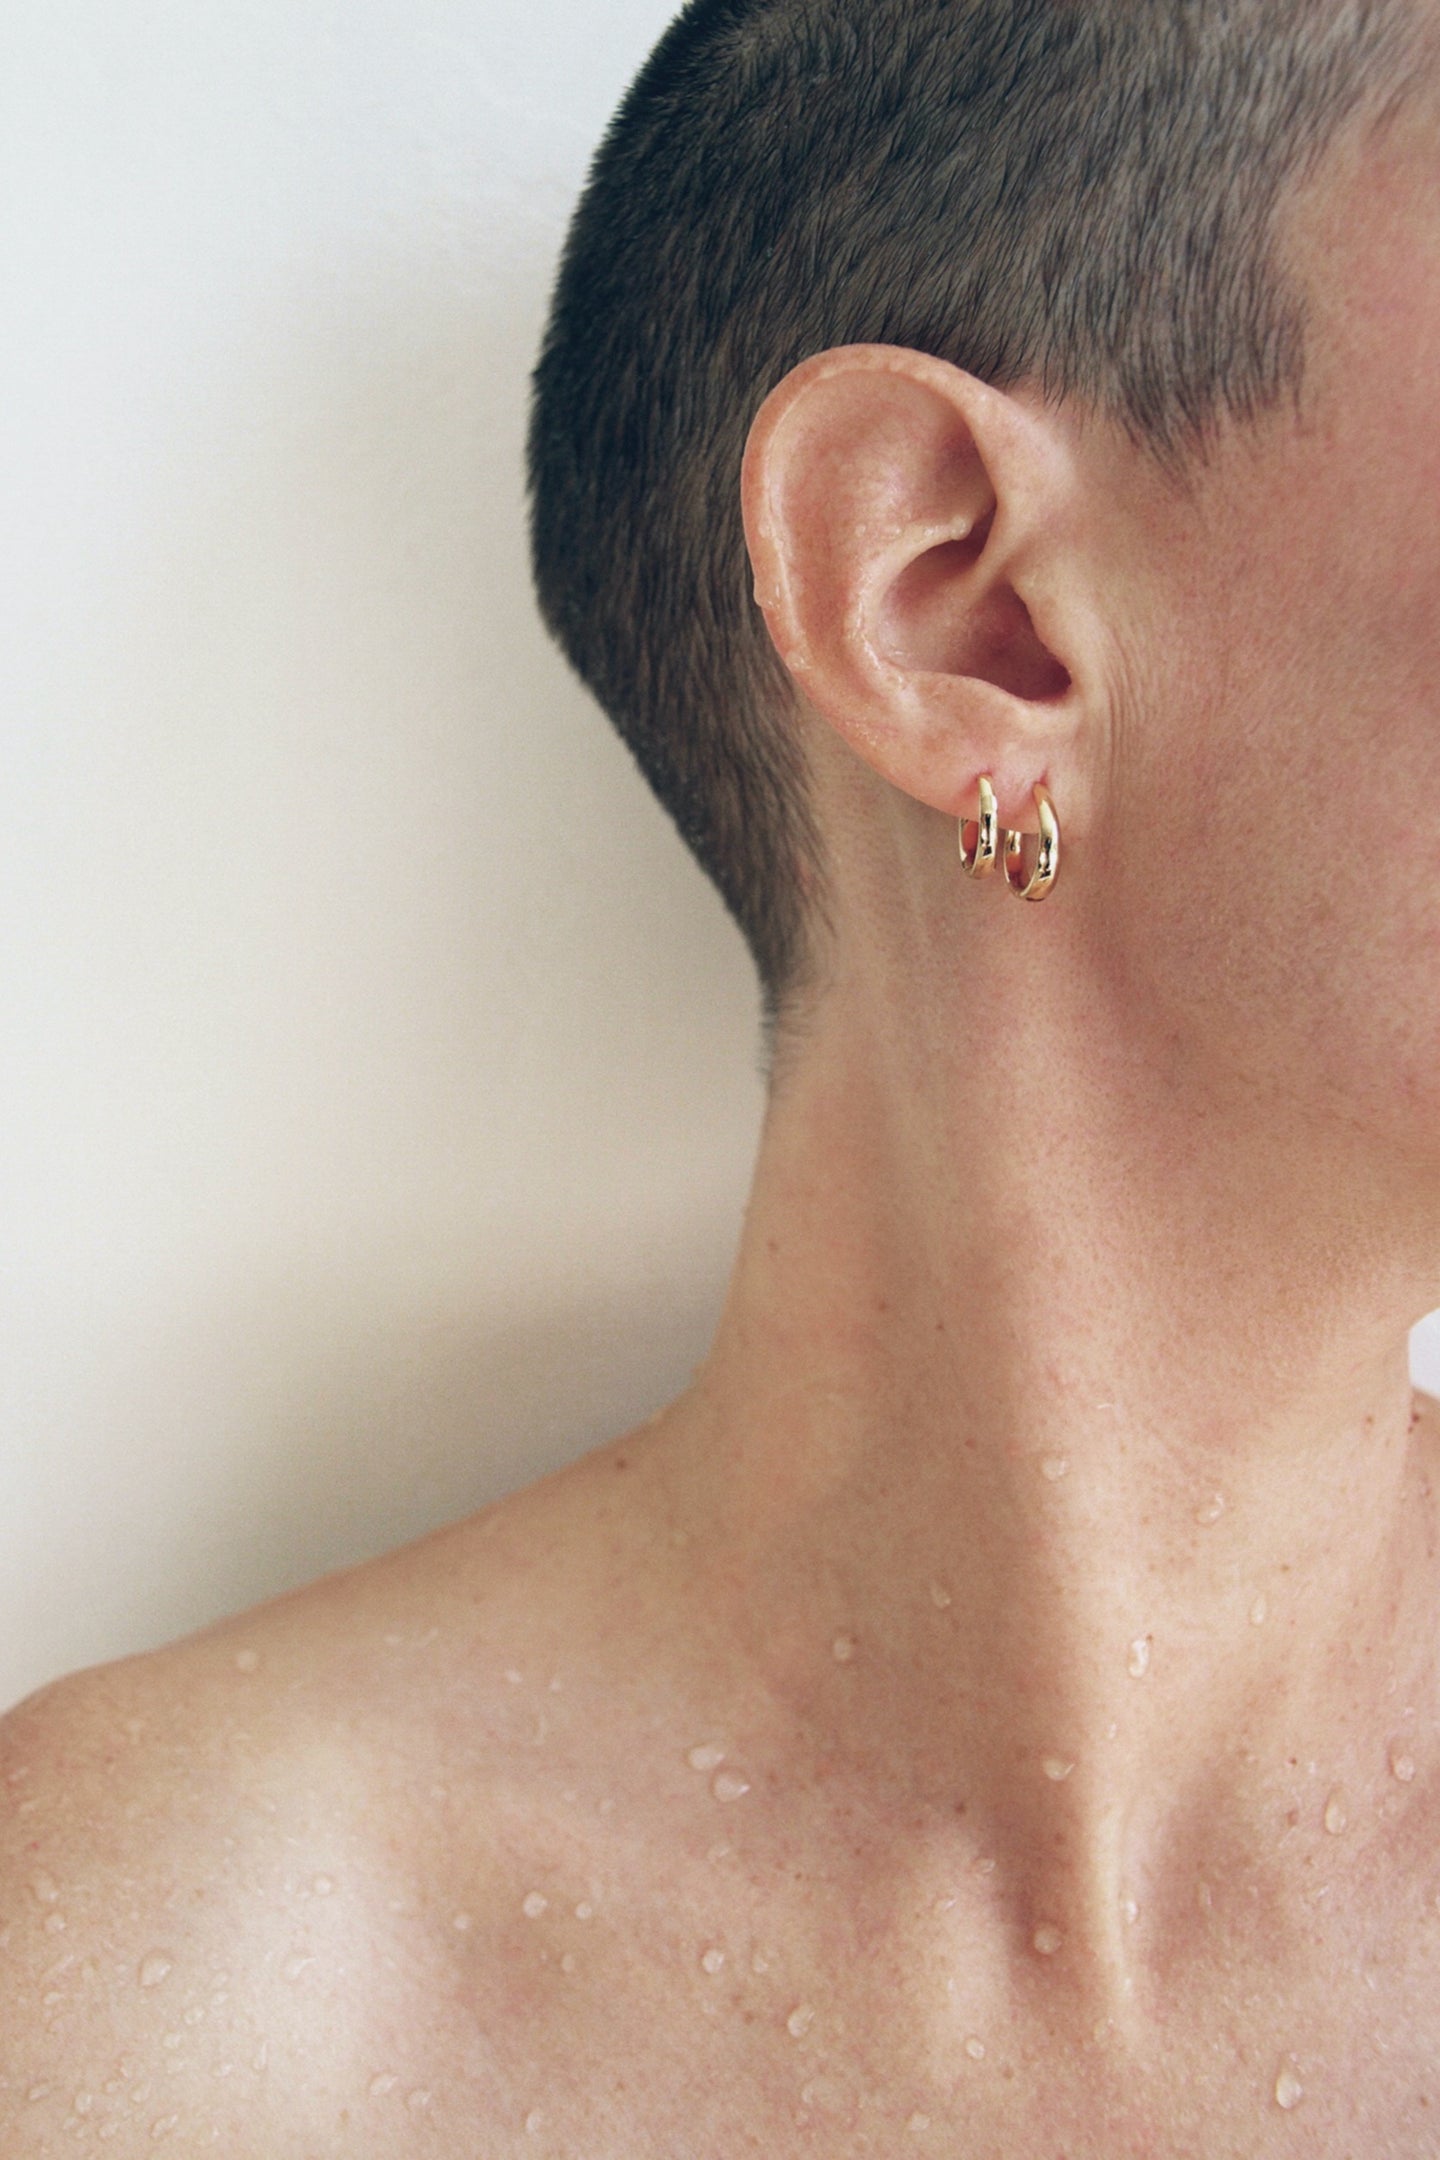 SOPHIE BUHAI Gold Tiny Essential Hoops